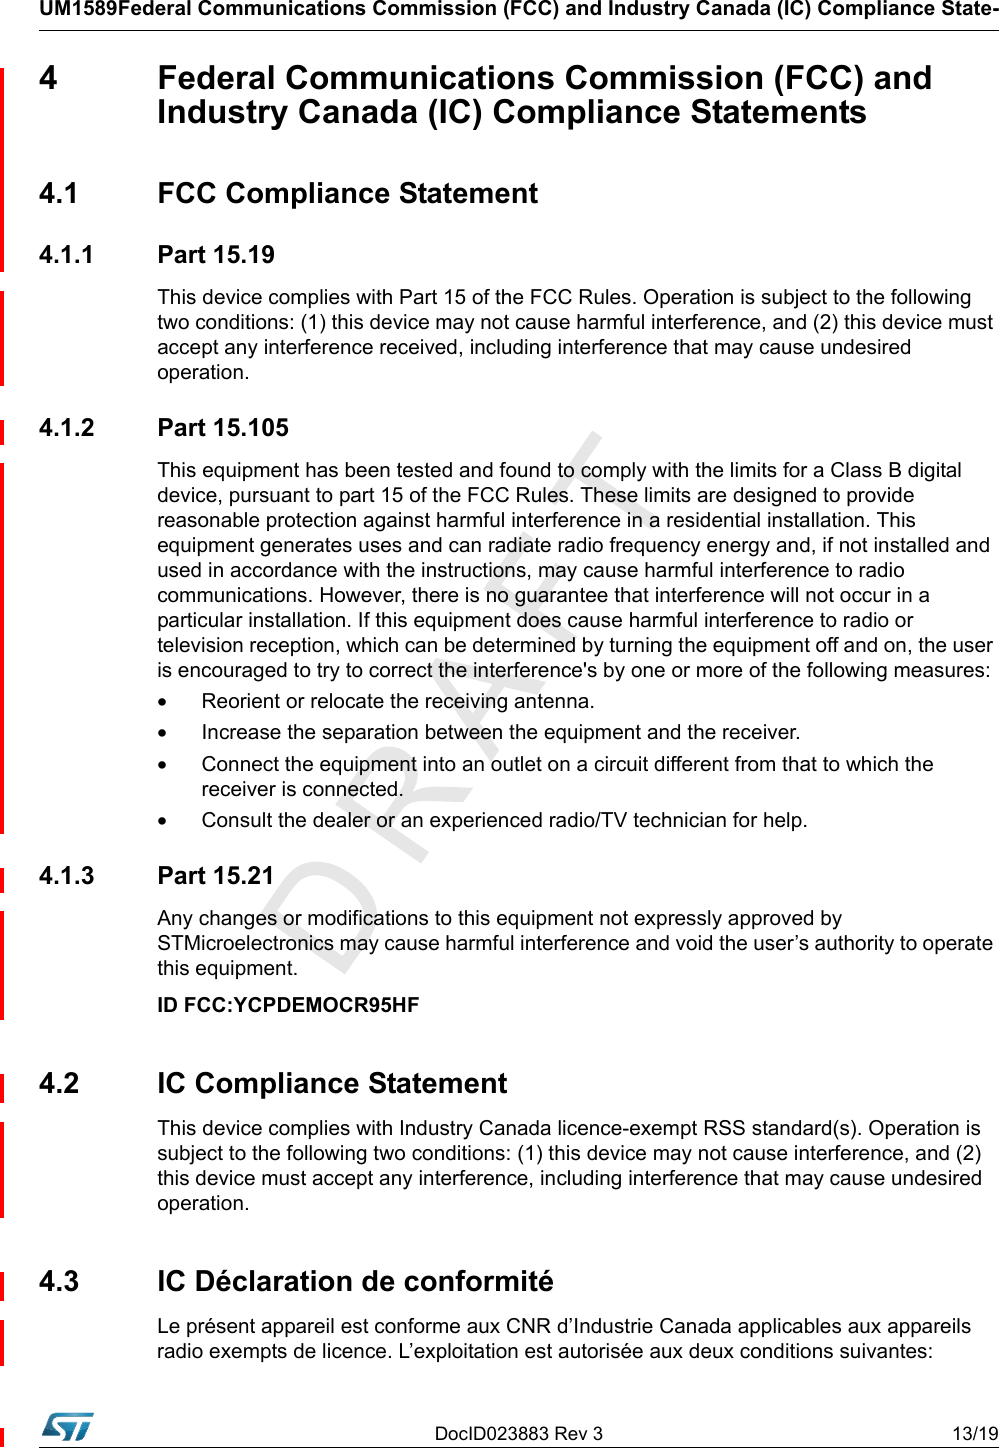 DocID023883 Rev 3 13/19UM1589Federal Communications Commission (FCC) and Industry Canada (IC) Compliance State-4  Federal Communications Commission (FCC) and Industry Canada (IC) Compliance Statements4.1  FCC Compliance Statement4.1.1 Part 15.19This device complies with Part 15 of the FCC Rules. Operation is subject to the following two conditions: (1) this device may not cause harmful interference, and (2) this device must accept any interference received, including interference that may cause undesired operation.4.1.2 Part 15.105This equipment has been tested and found to comply with the limits for a Class B digital device, pursuant to part 15 of the FCC Rules. These limits are designed to provide reasonable protection against harmful interference in a residential installation. This equipment generates uses and can radiate radio frequency energy and, if not installed and used in accordance with the instructions, may cause harmful interference to radio communications. However, there is no guarantee that interference will not occur in a particular installation. If this equipment does cause harmful interference to radio or television reception, which can be determined by turning the equipment off and on, the user is encouraged to try to correct the interference&apos;s by one or more of the following measures:•Reorient or relocate the receiving antenna.•Increase the separation between the equipment and the receiver.•Connect the equipment into an outlet on a circuit different from that to which the receiver is connected.•Consult the dealer or an experienced radio/TV technician for help.4.1.3 Part 15.21Any changes or modifications to this equipment not expressly approved by STMicroelectronics may cause harmful interference and void the user’s authority to operate this equipment.ID FCC:YCPDEMOCR95HF4.2  IC Compliance StatementThis device complies with Industry Canada licence-exempt RSS standard(s). Operation is subject to the following two conditions: (1) this device may not cause interference, and (2) this device must accept any interference, including interference that may cause undesired operation.4.3  IC Déclaration de conformitéLe présent appareil est conforme aux CNR d’Industrie Canada applicables aux appareils radio exempts de licence. L’exploitation est autorisée aux deux conditions suivantes: